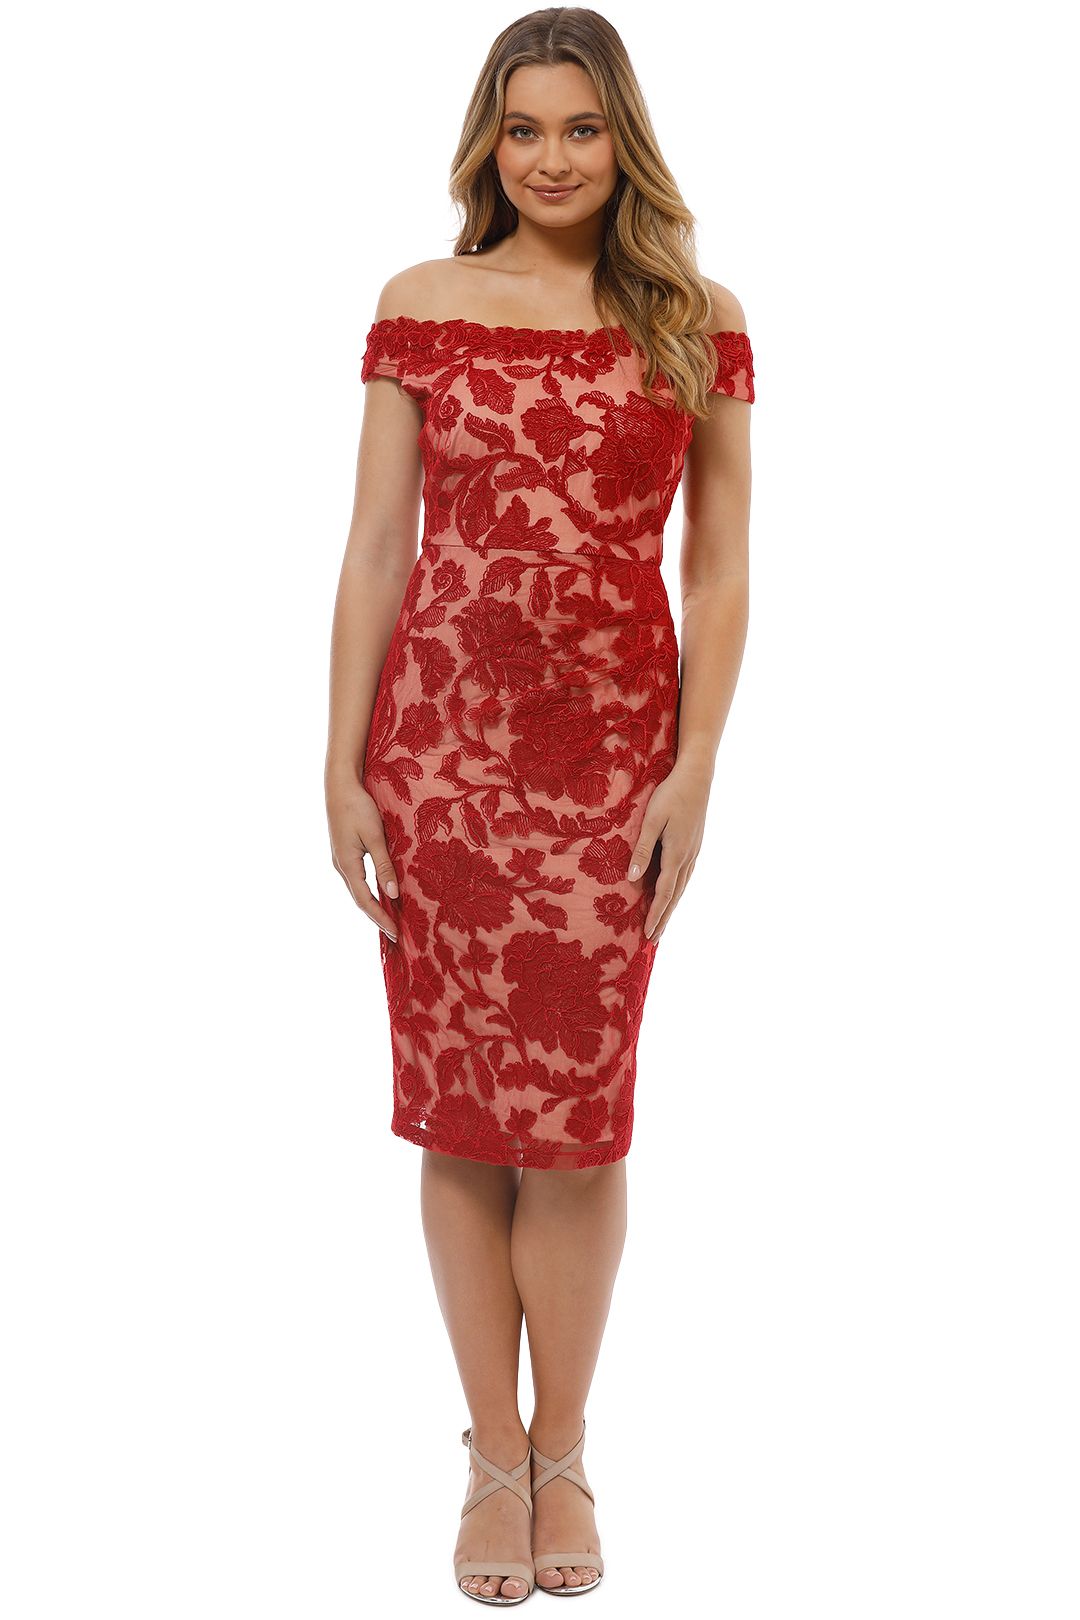 Montique - Christiana Lace Dress - Red - Front